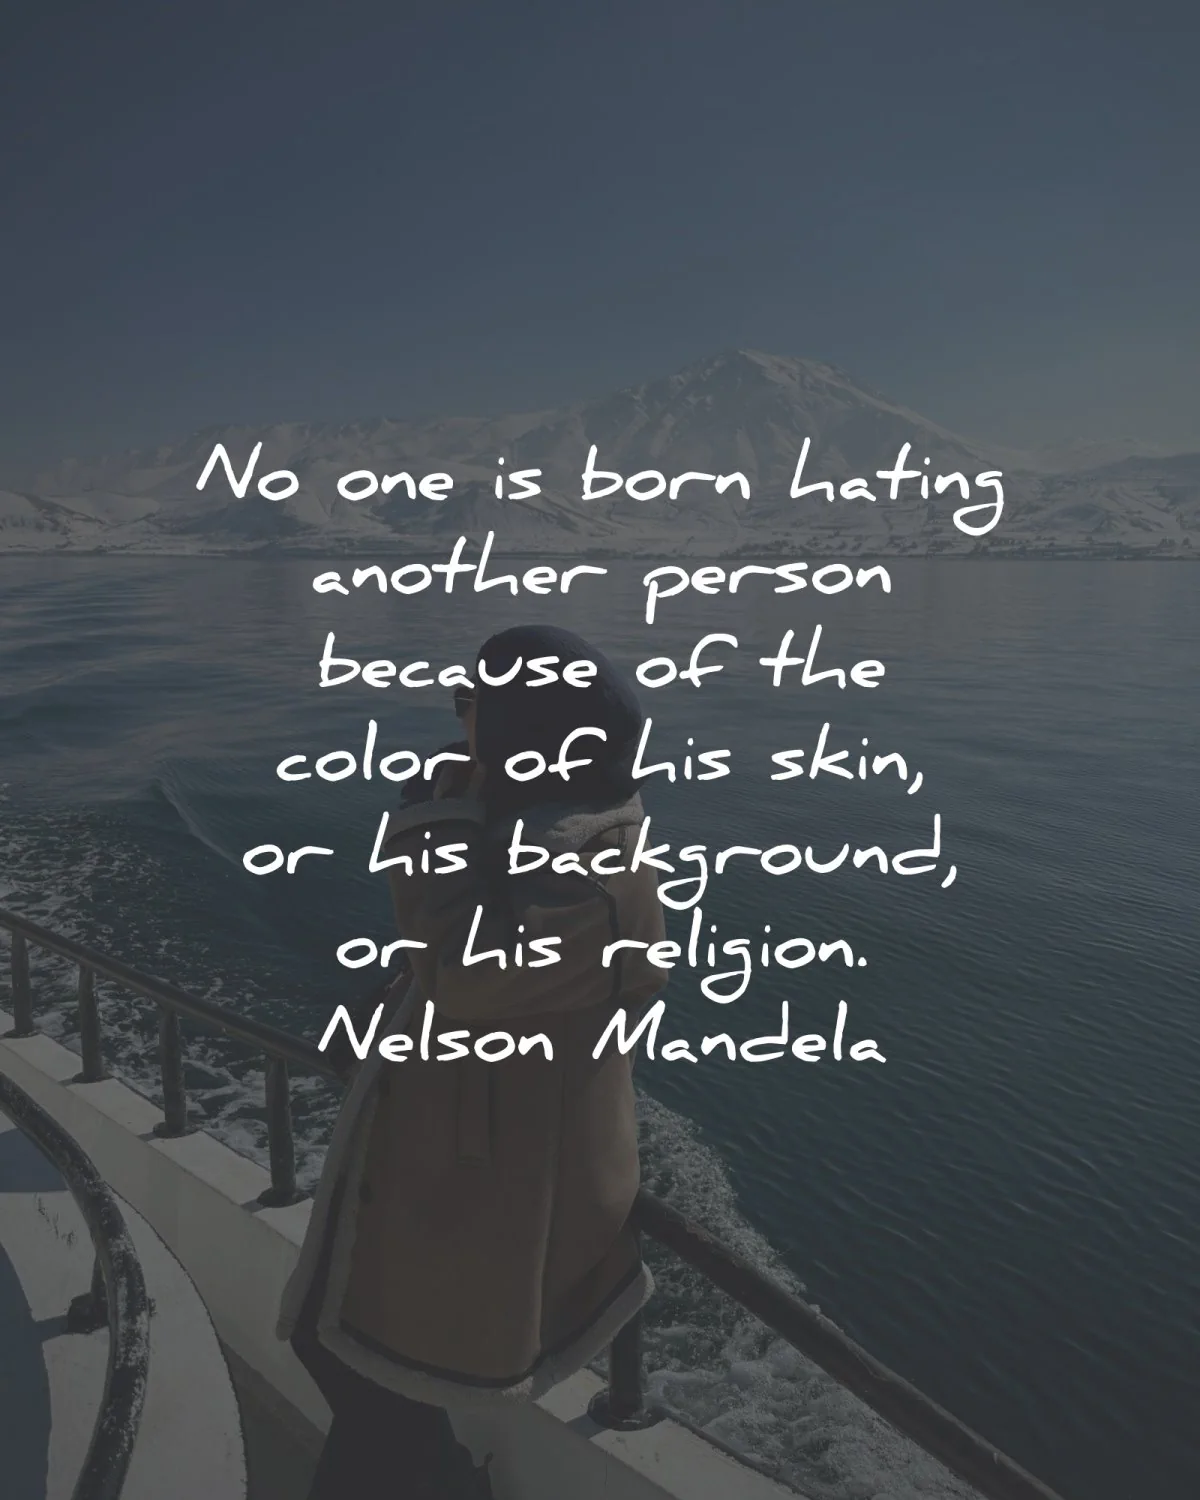 nelson mandela quotes born hating another person wisdom